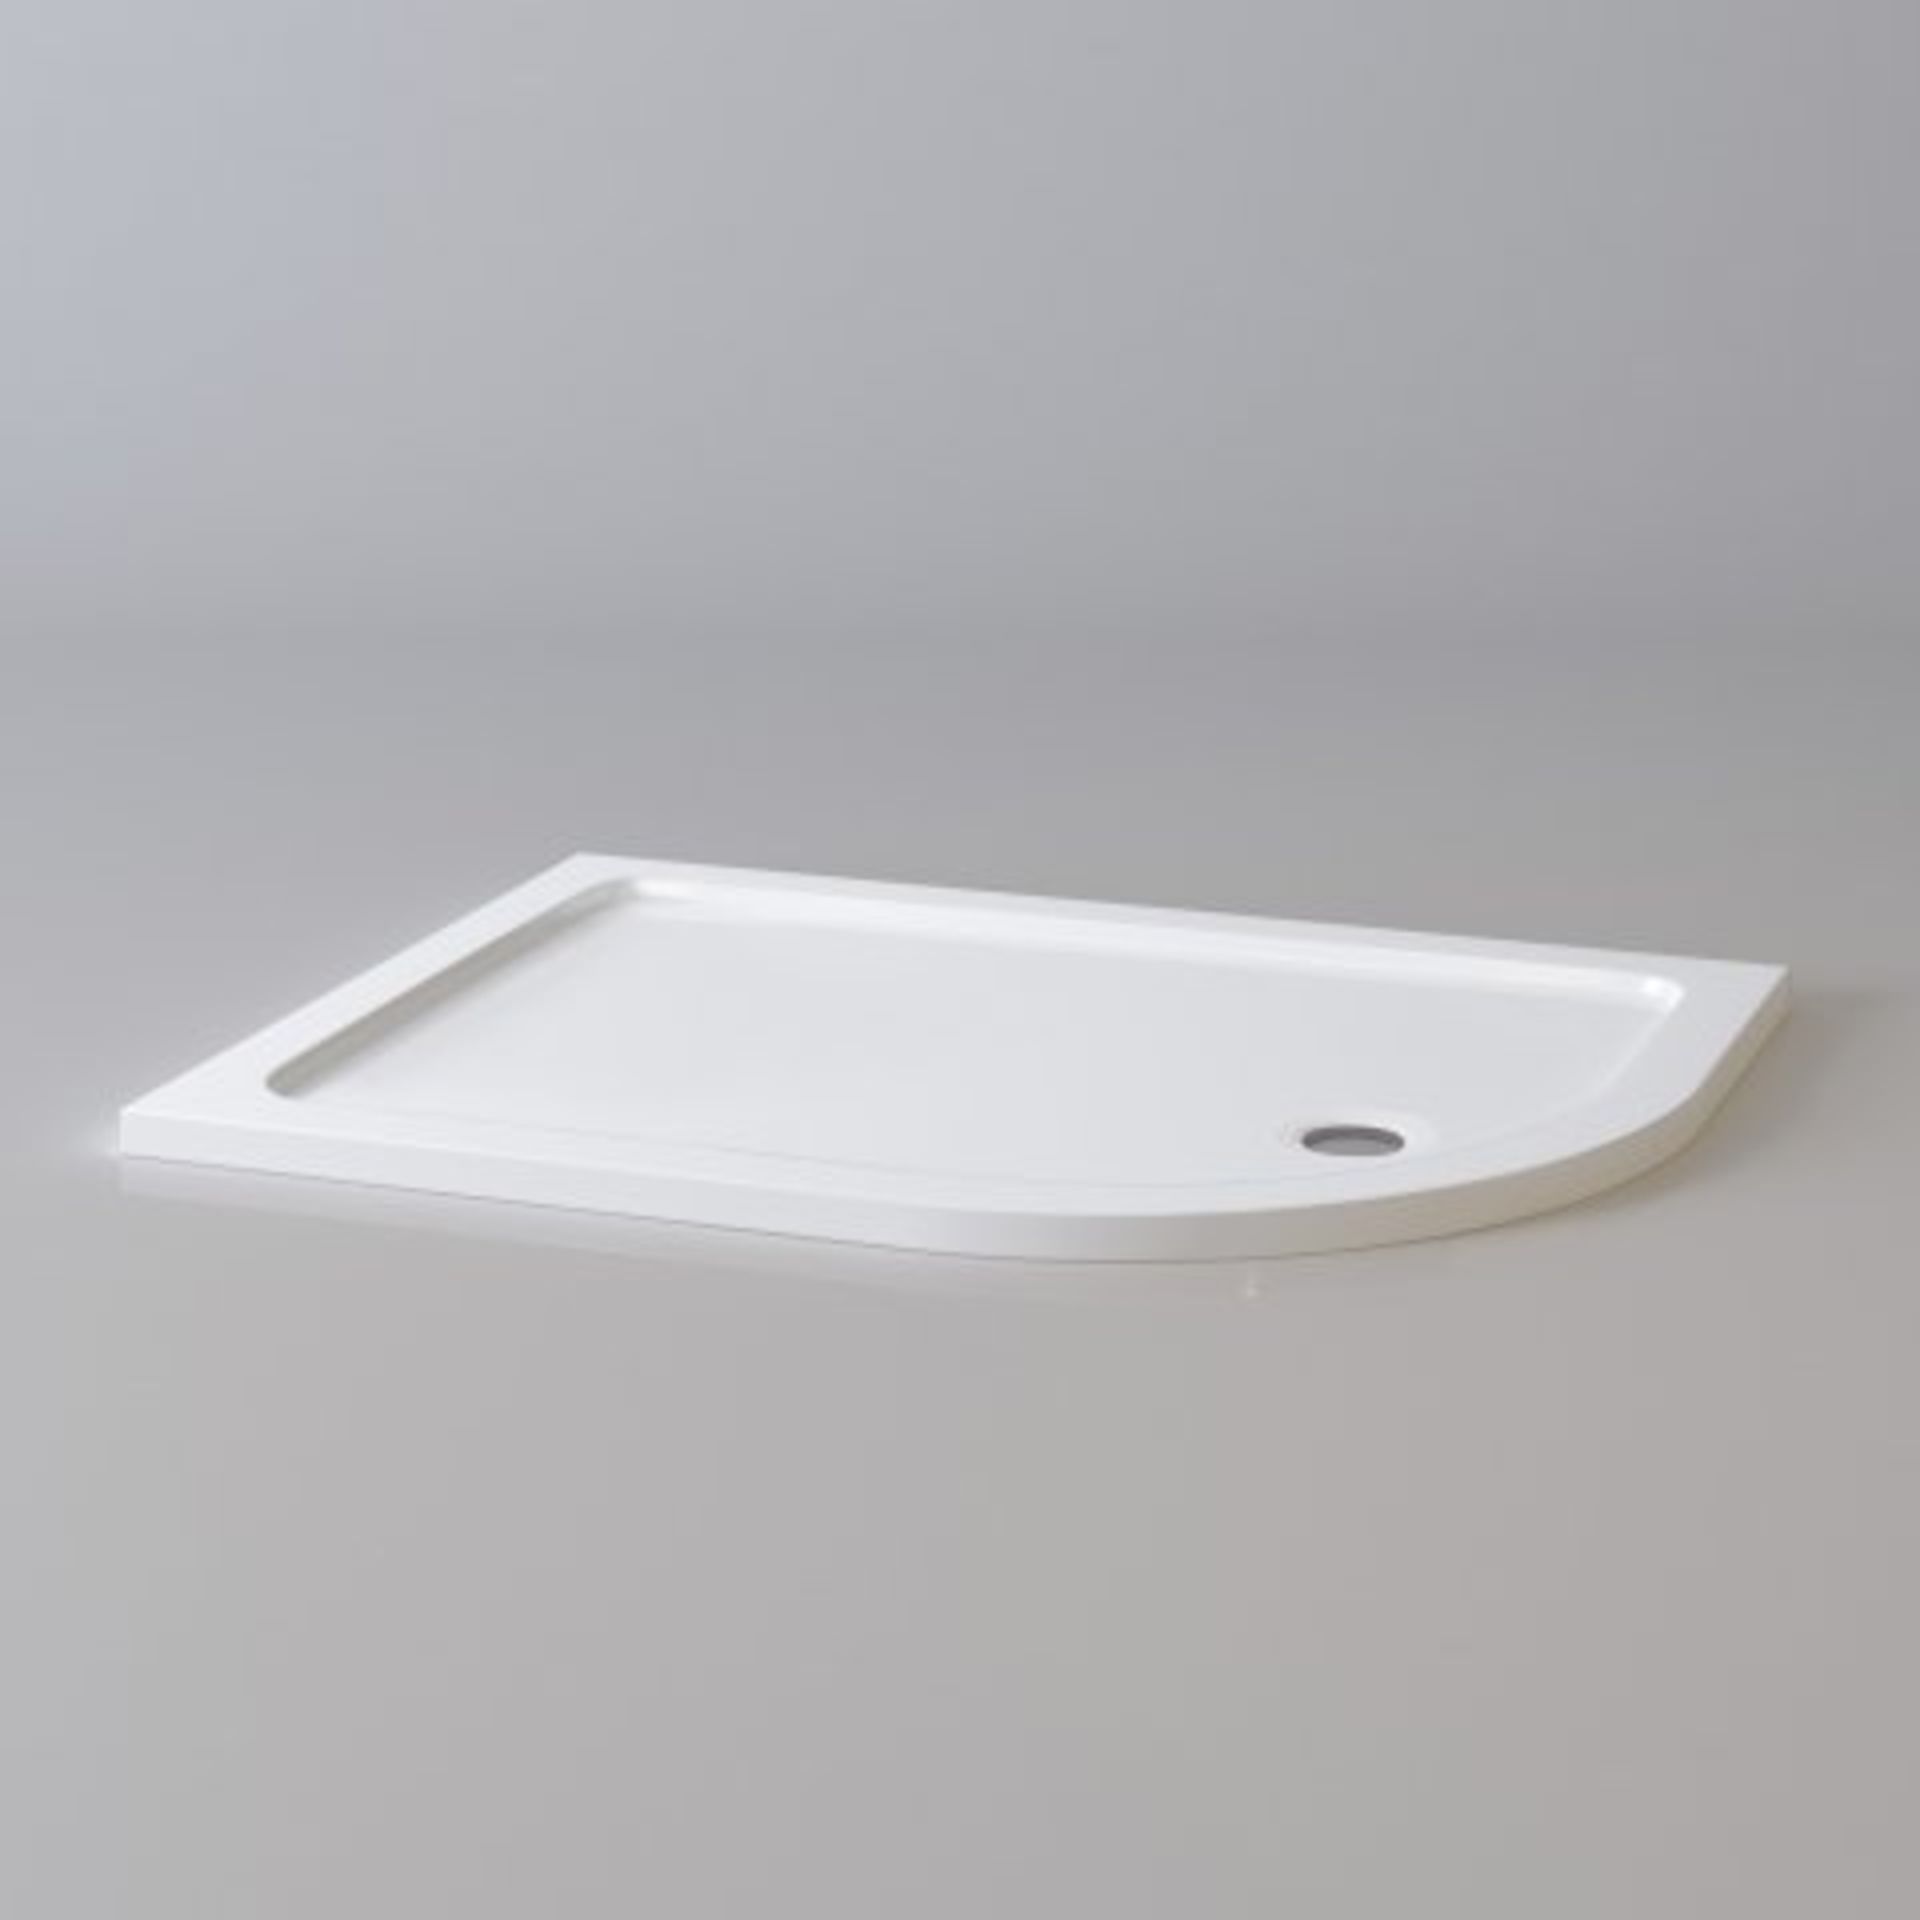 (N218) 1200x900mm Offset Quadrant Ultraslim Stone Shower Tray - Right. RRP £324.99. Magnificently